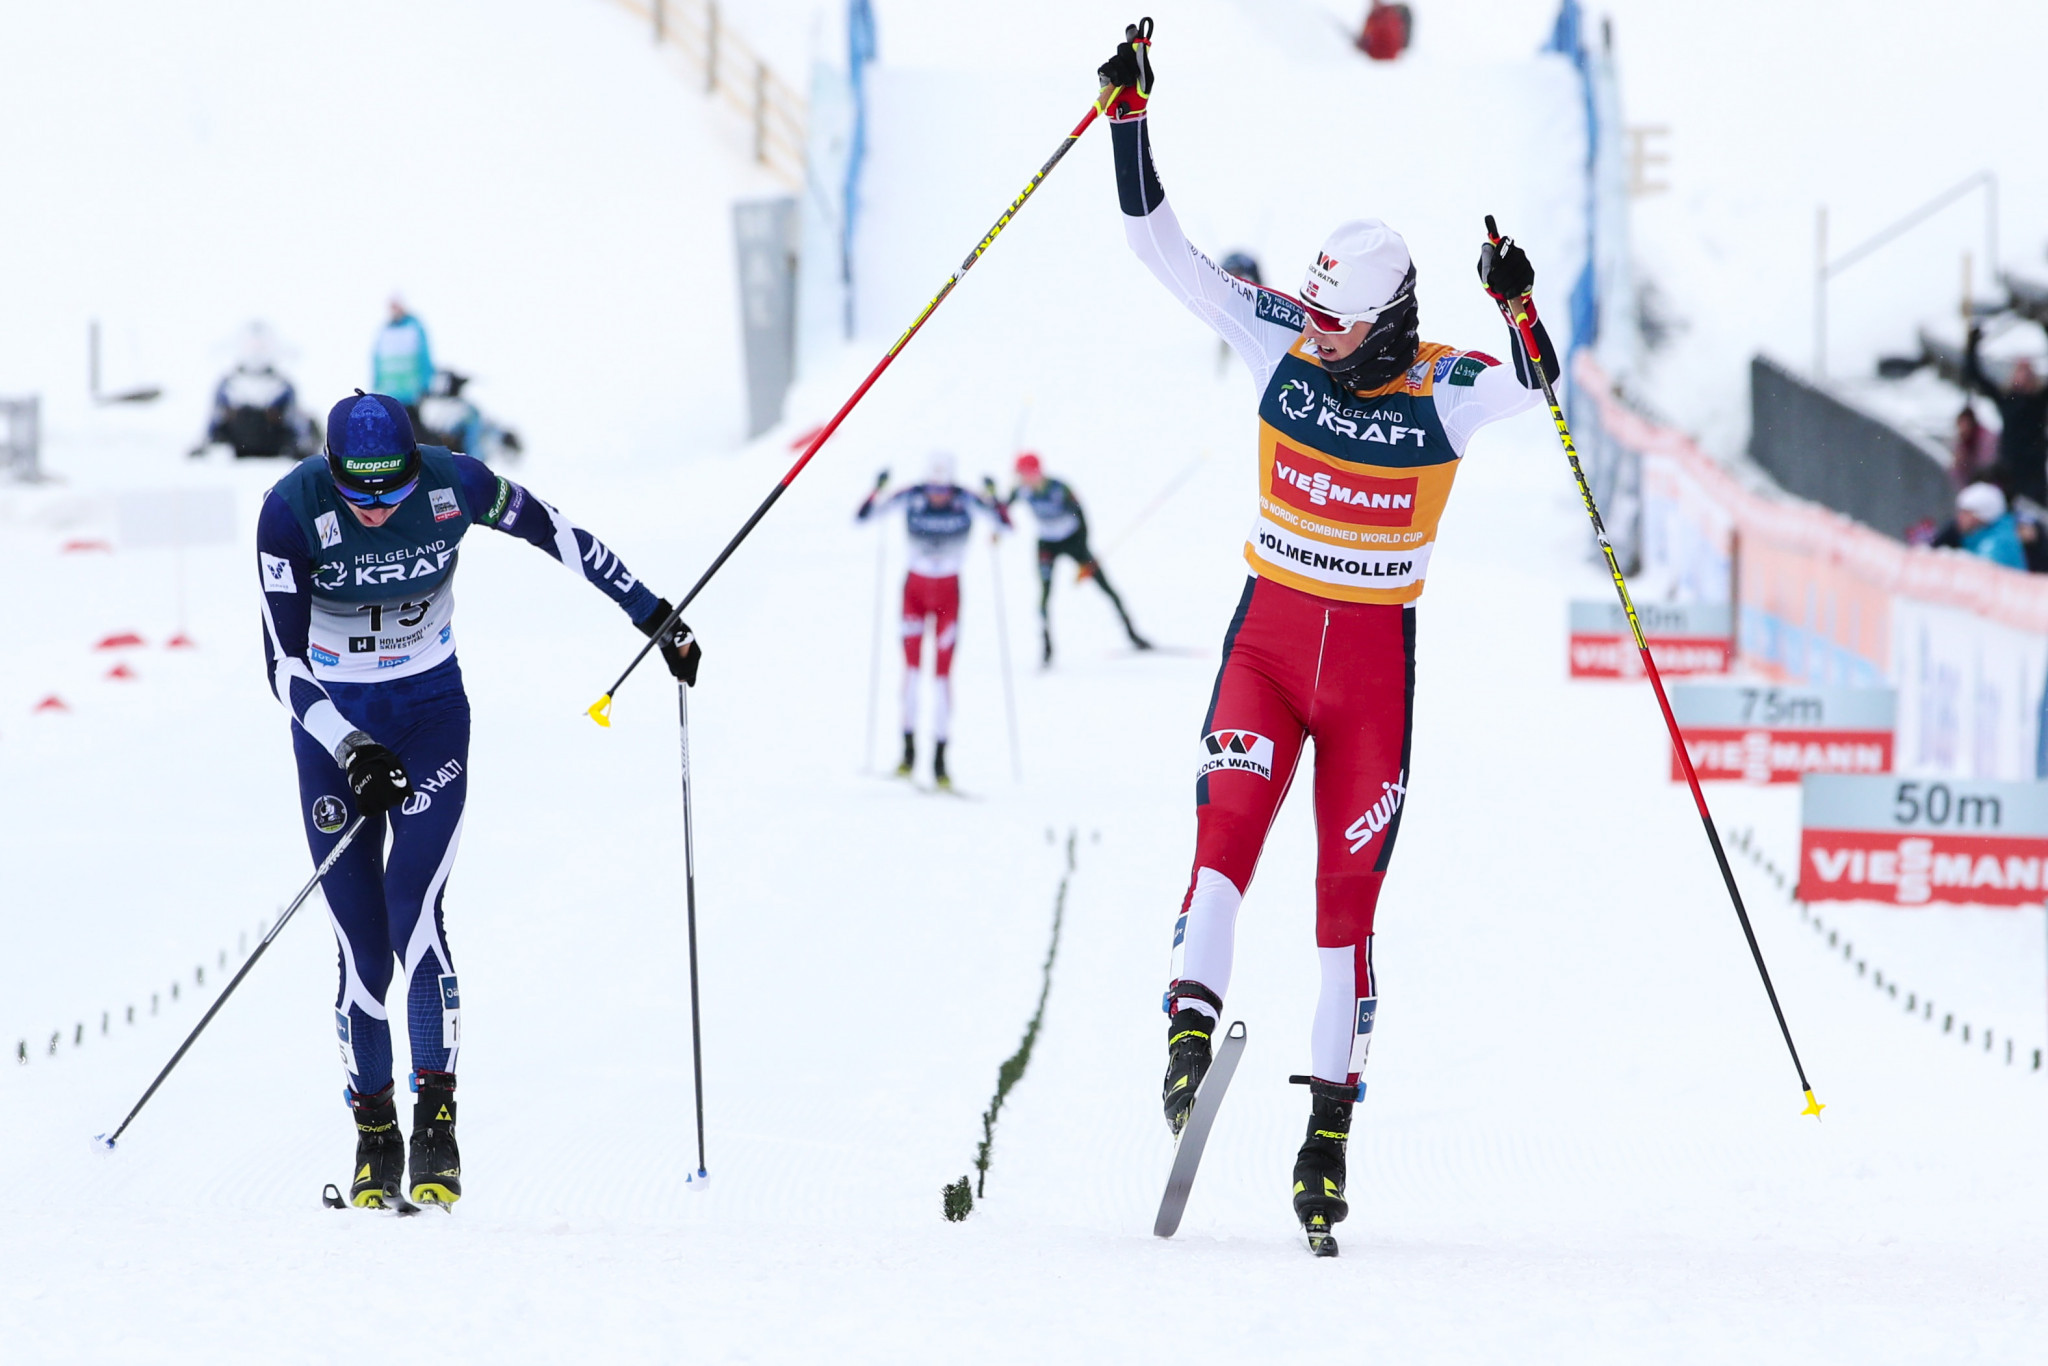 Draft calendar for 2019-2020 FIS Nordic Combined World Cup decided at annual meeting in Zürich